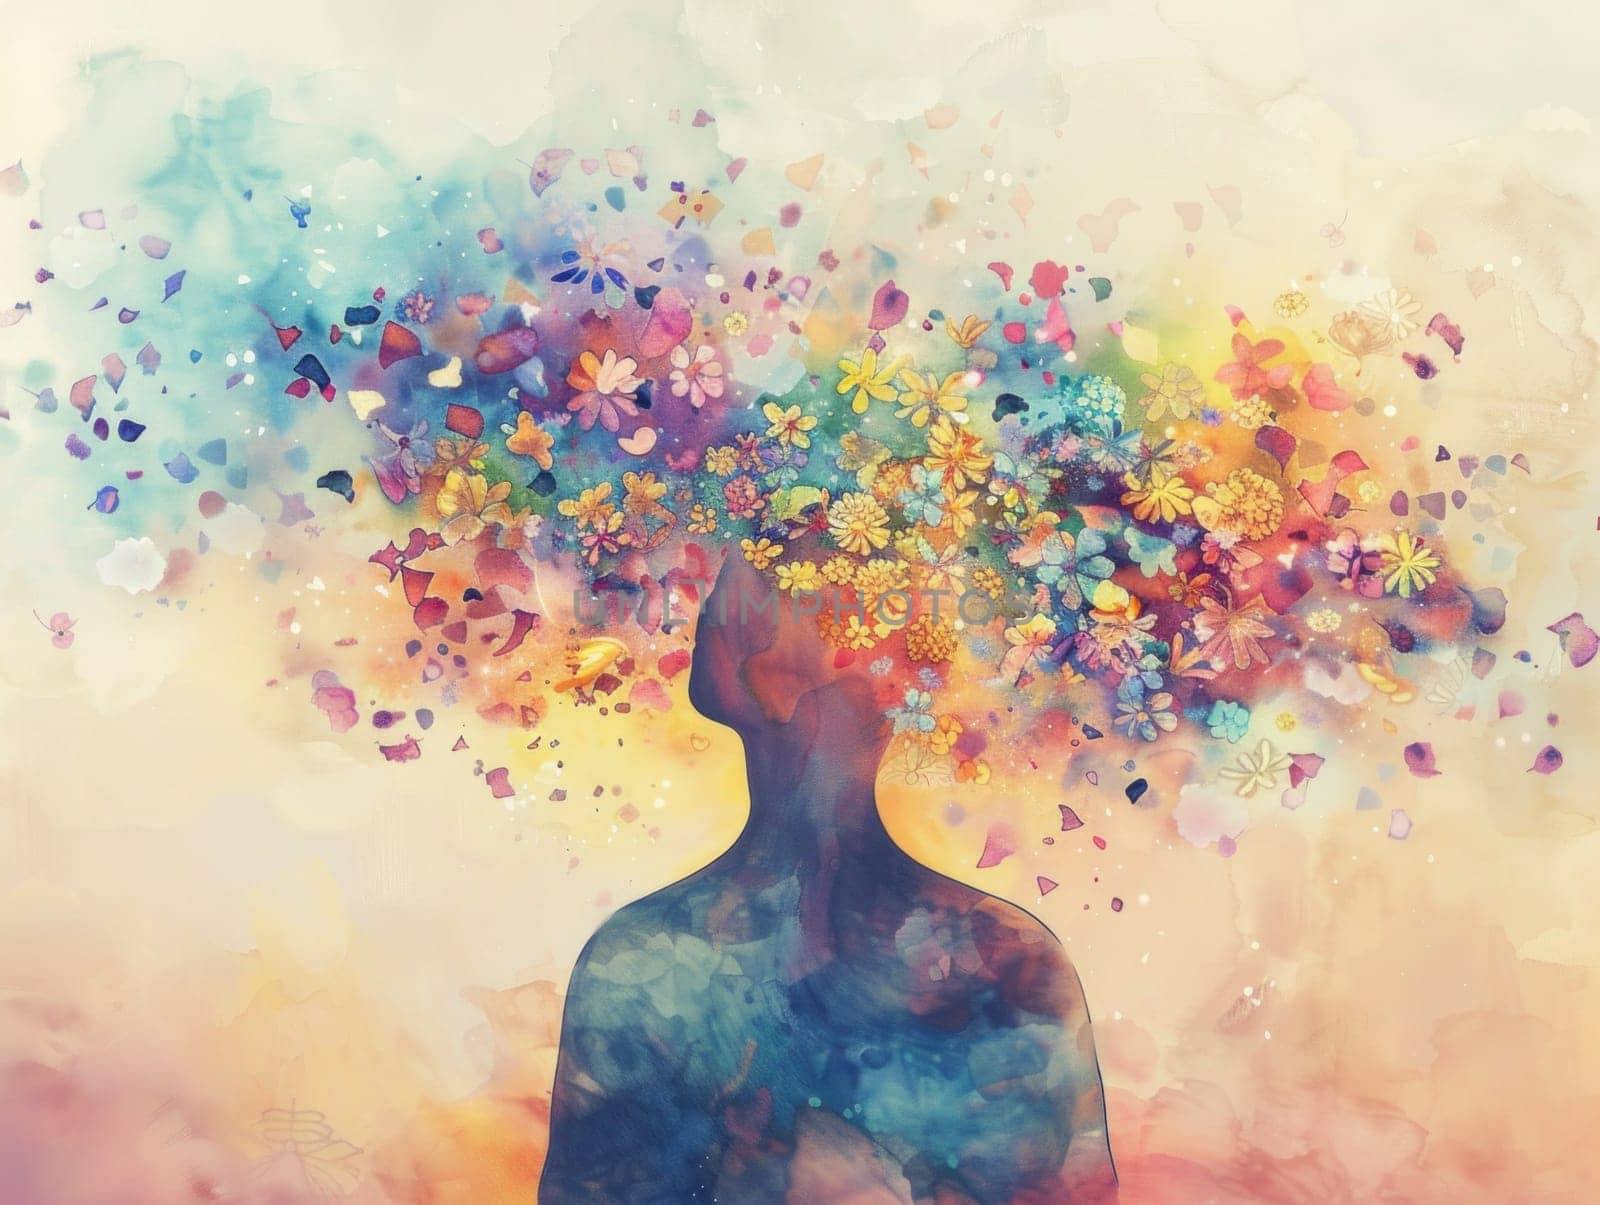 Vibrant woman with colorful flowers in her hair standing against colorful background, beauty and art theme